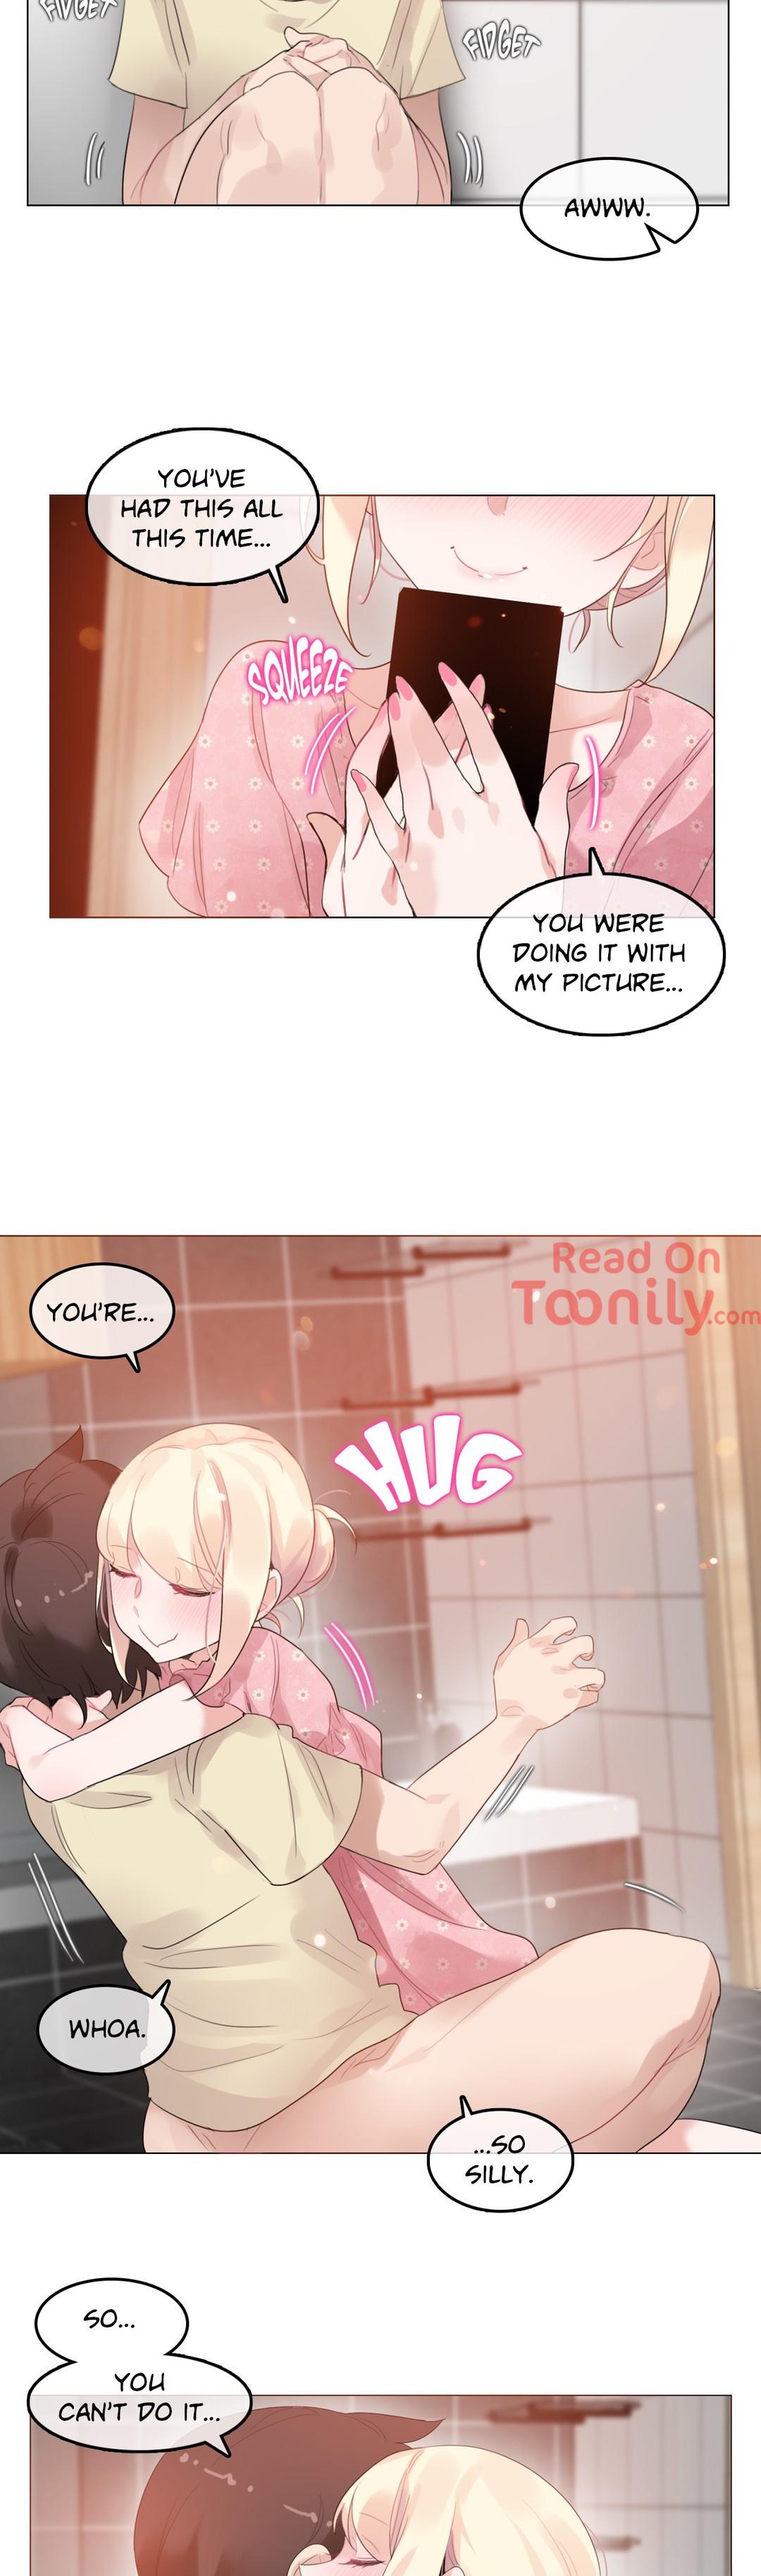 A Pervert's Daily Life • Chapter 66-70 70